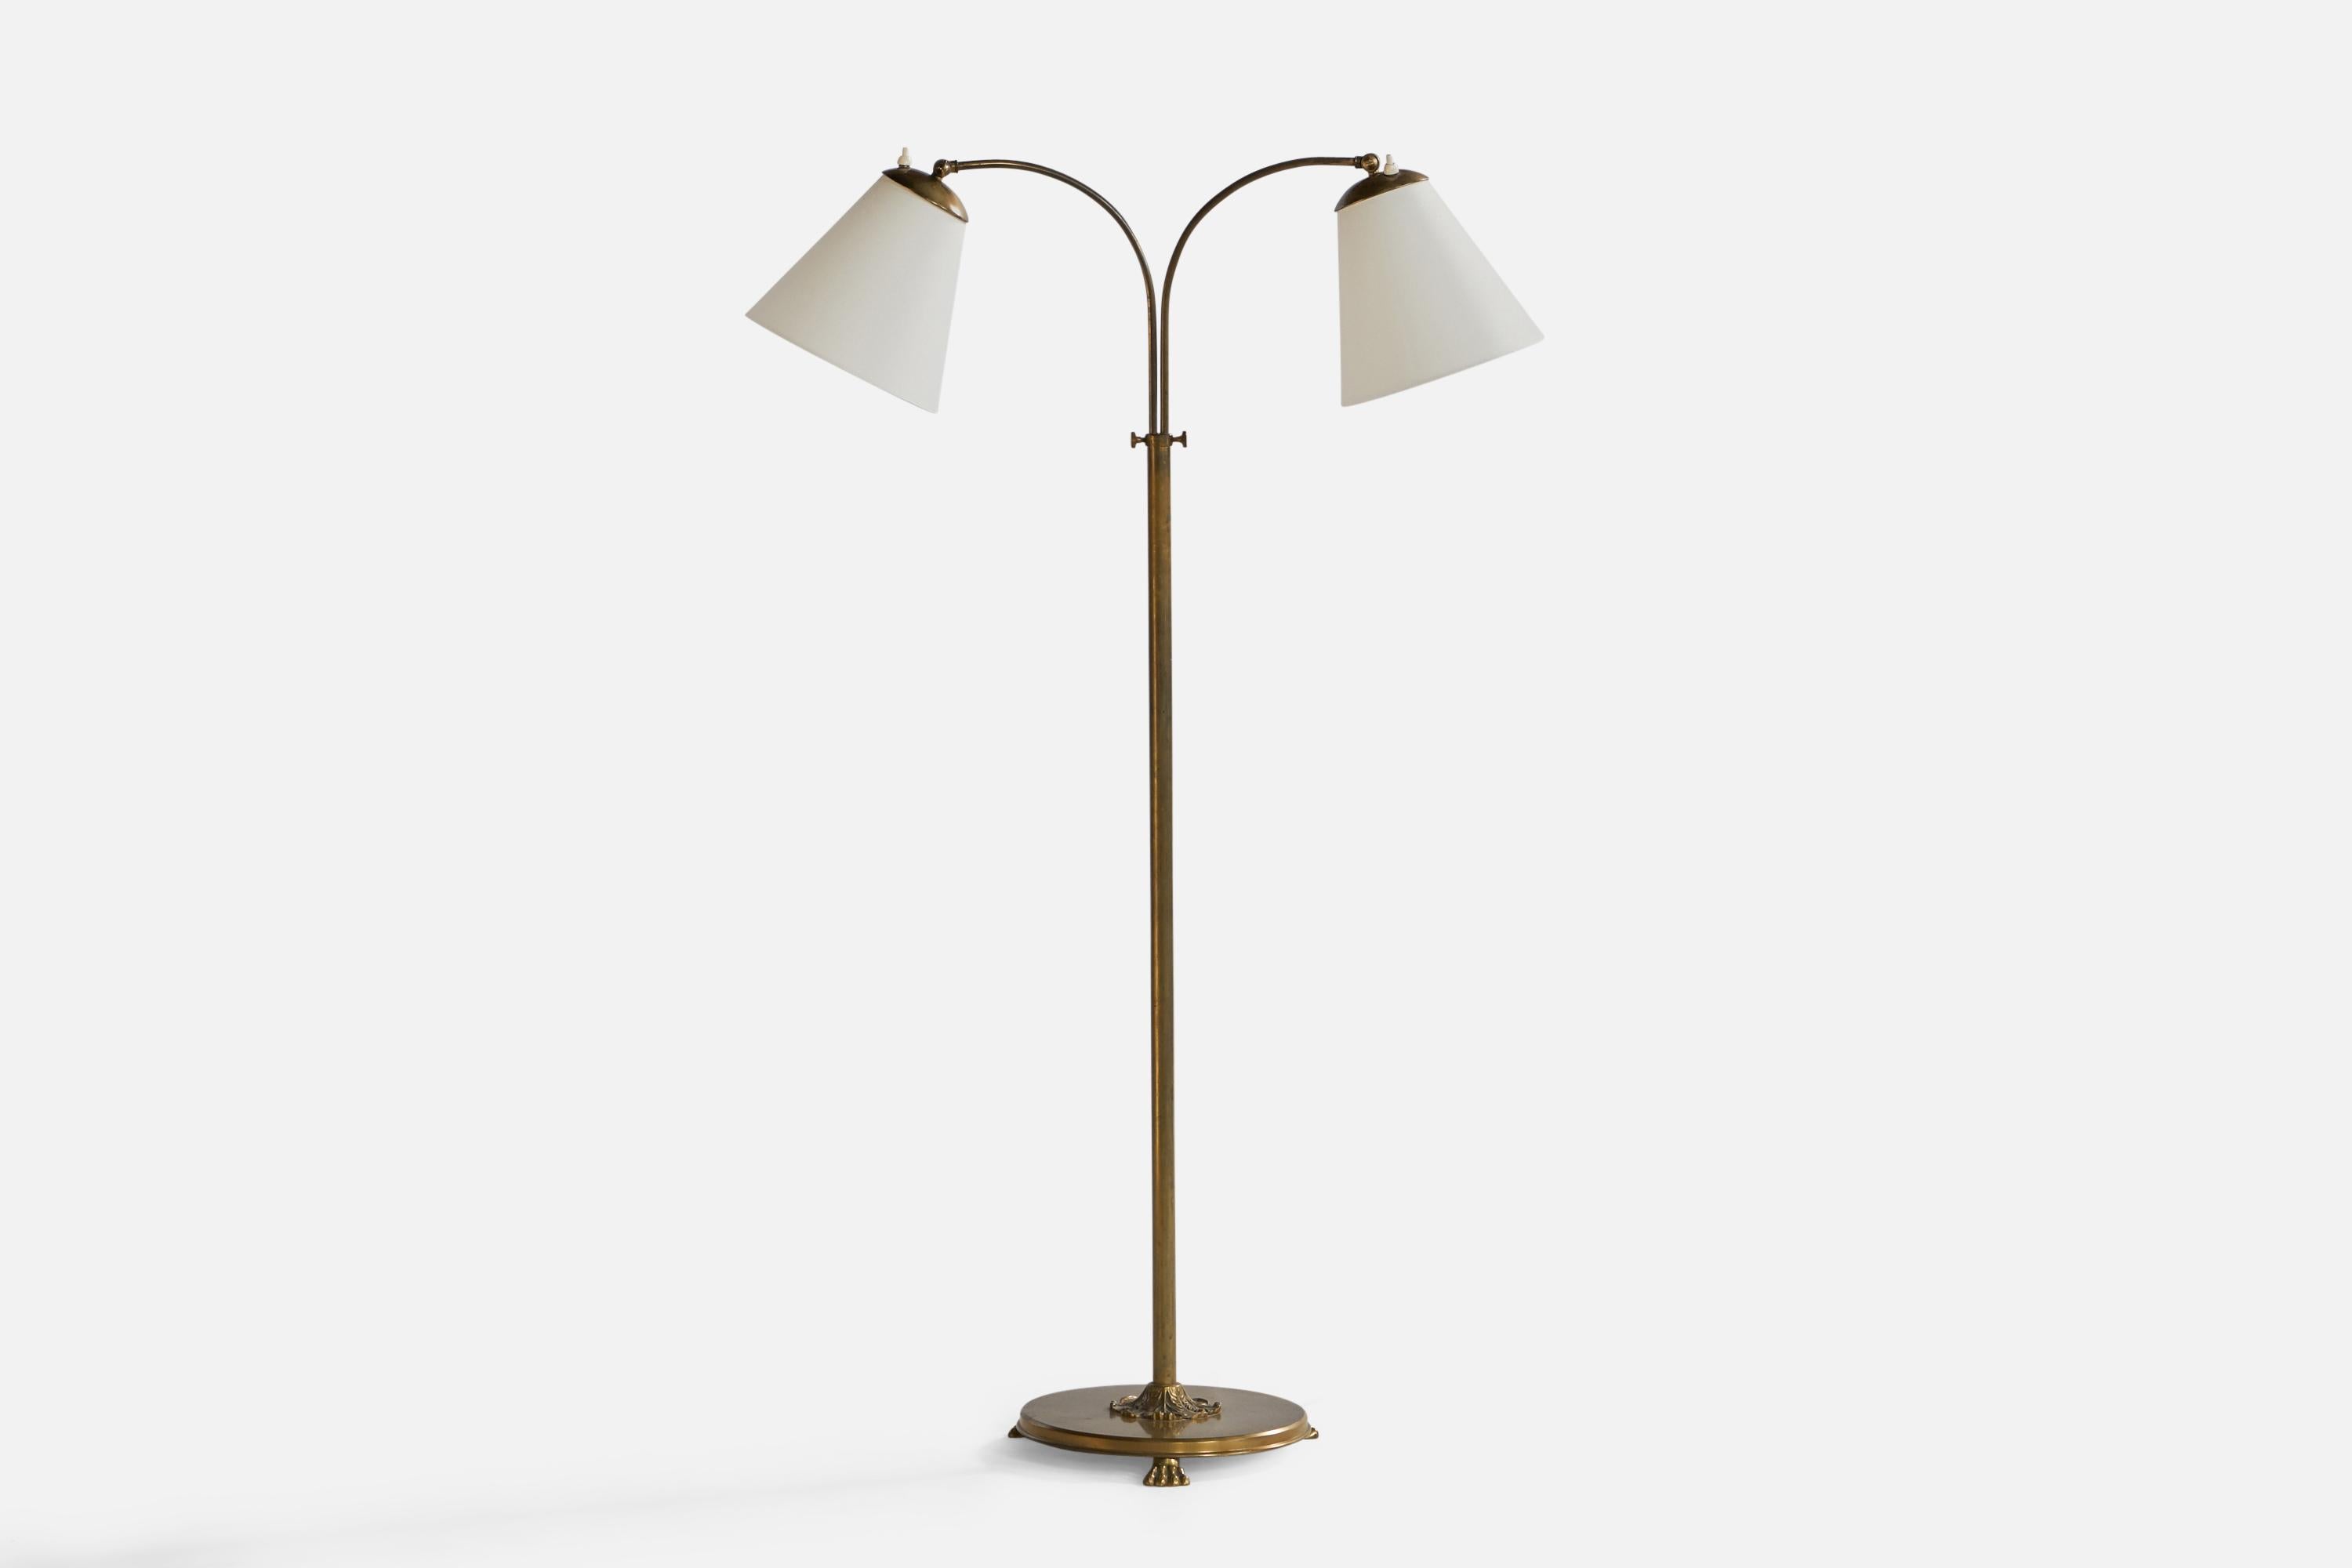 An adjustable two-armed brass and white fabric floor lamp designed and produced in Sweden, 1940s.

Overall Dimensions (inches): 51.6” H x 33.25” W x 12.26” Depth. Stated dimensions include shades.
Dimensions vary based on position of light. Height